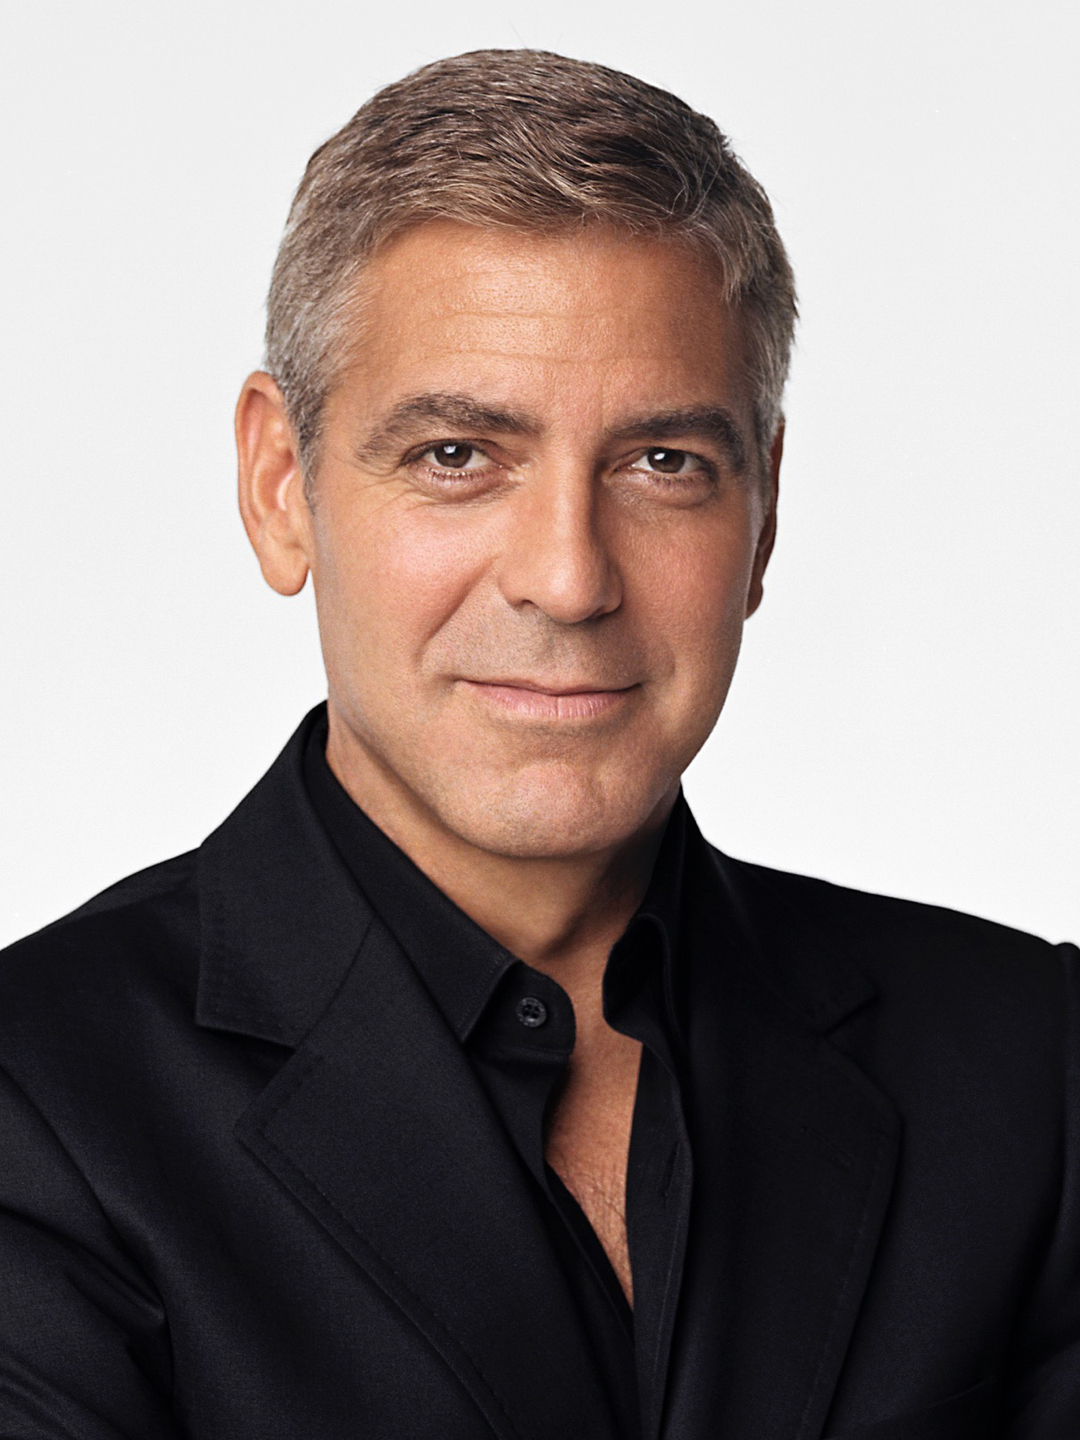 George Clooney who is his mother